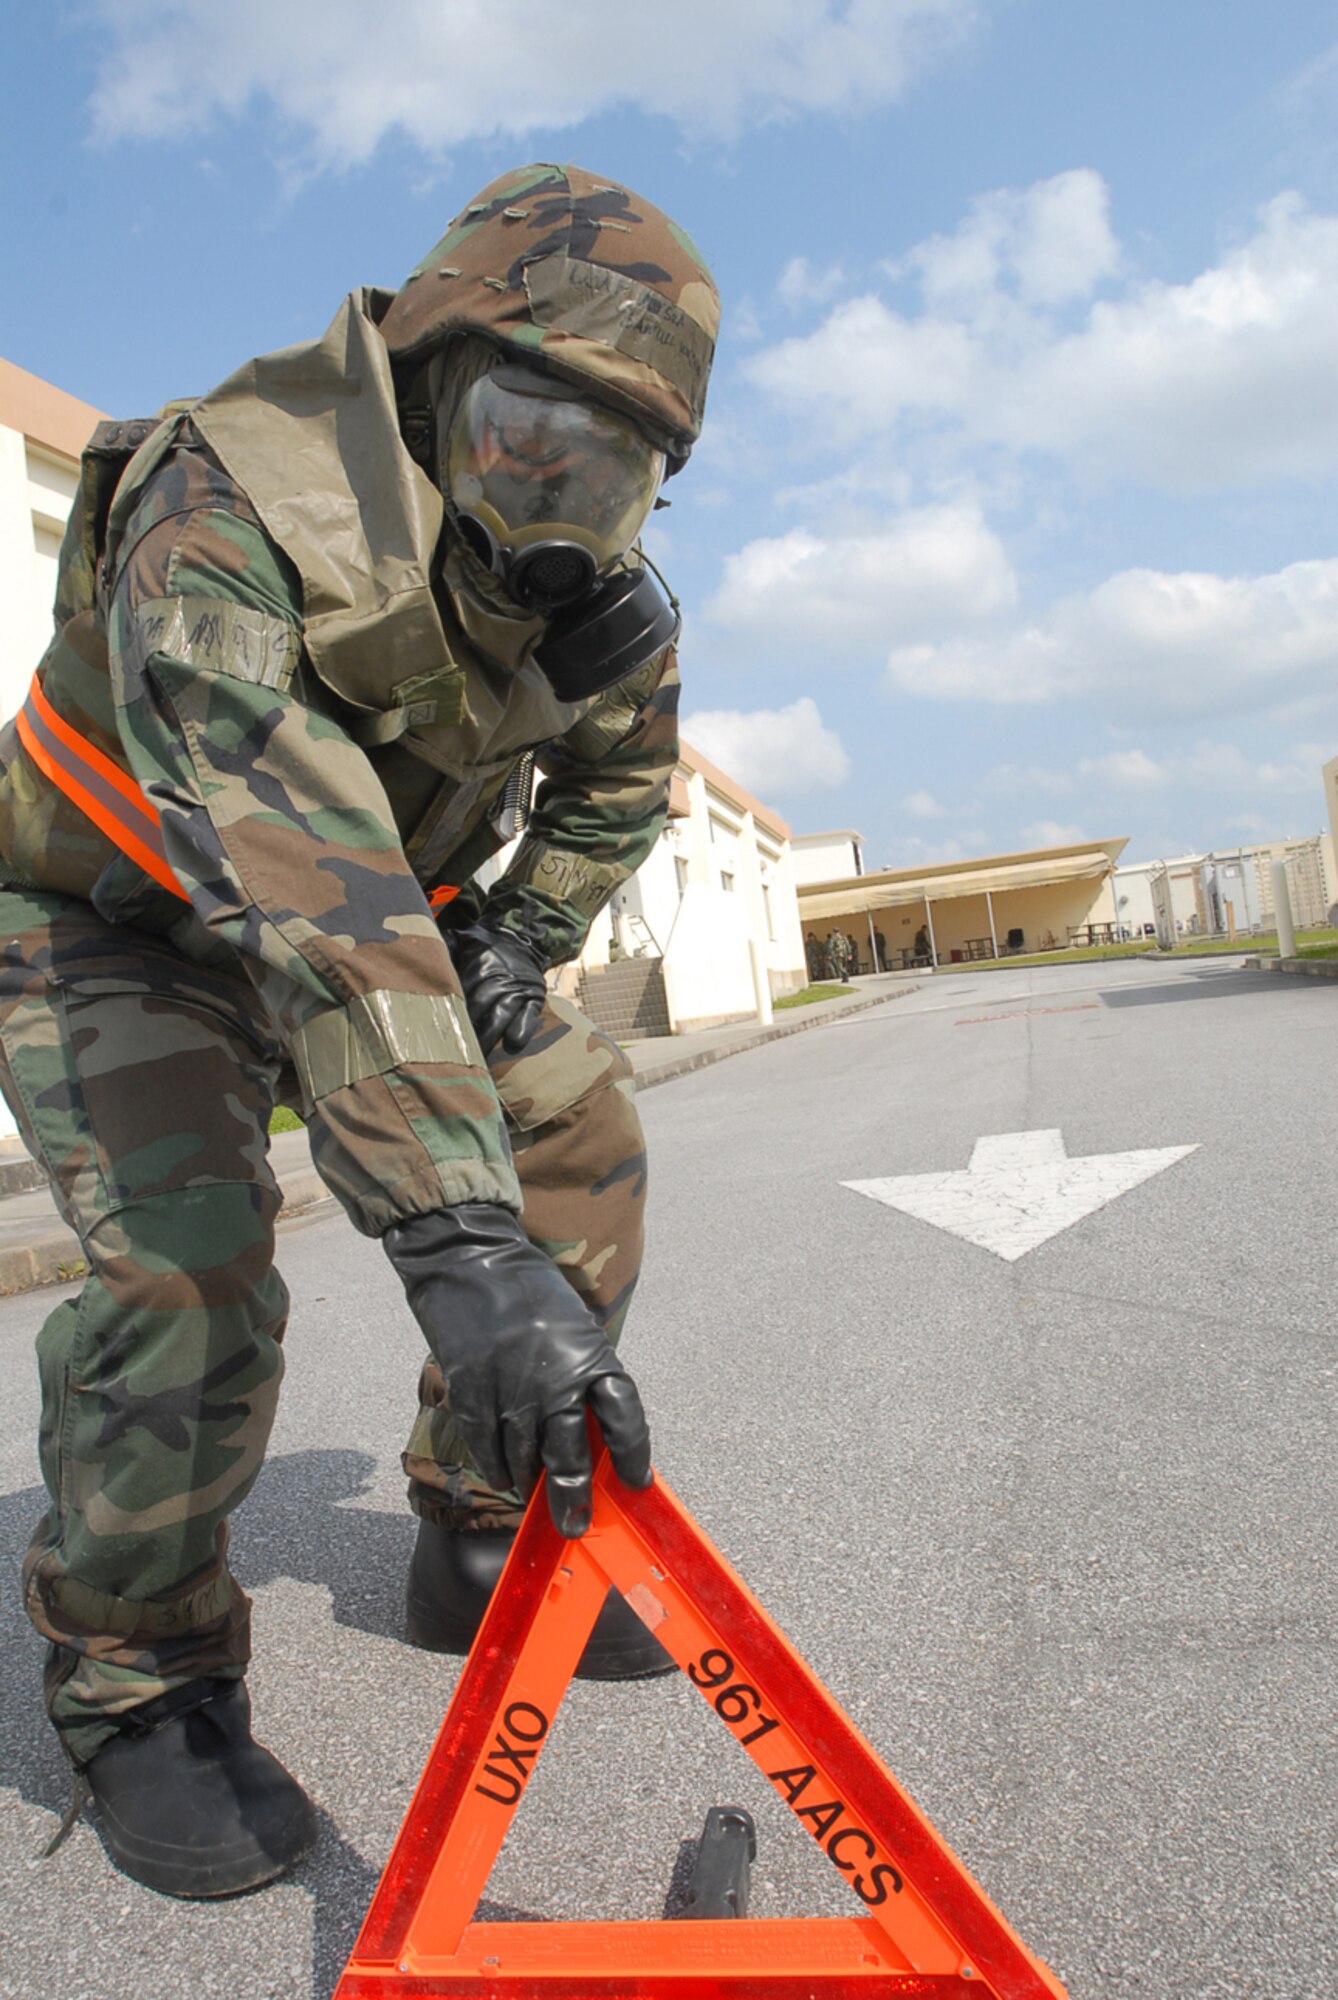 Senior Airman Samuel Wager, 961st Airborne Air Control Squadron, uses an unexploded ordinance sign to mark of the perimeter of a simulated UXO during local operational readiness exercise Beverly High 08-4 at Kadena Air Base, Japan, Feb. 15, 2008. The 18th Wing conducted the exercise from Feb. 10 to 15 to test Airmen's ability to respond in contingency situations. (U.S. Air Force photo/Senior Airman Darnell T. Cannady) 
